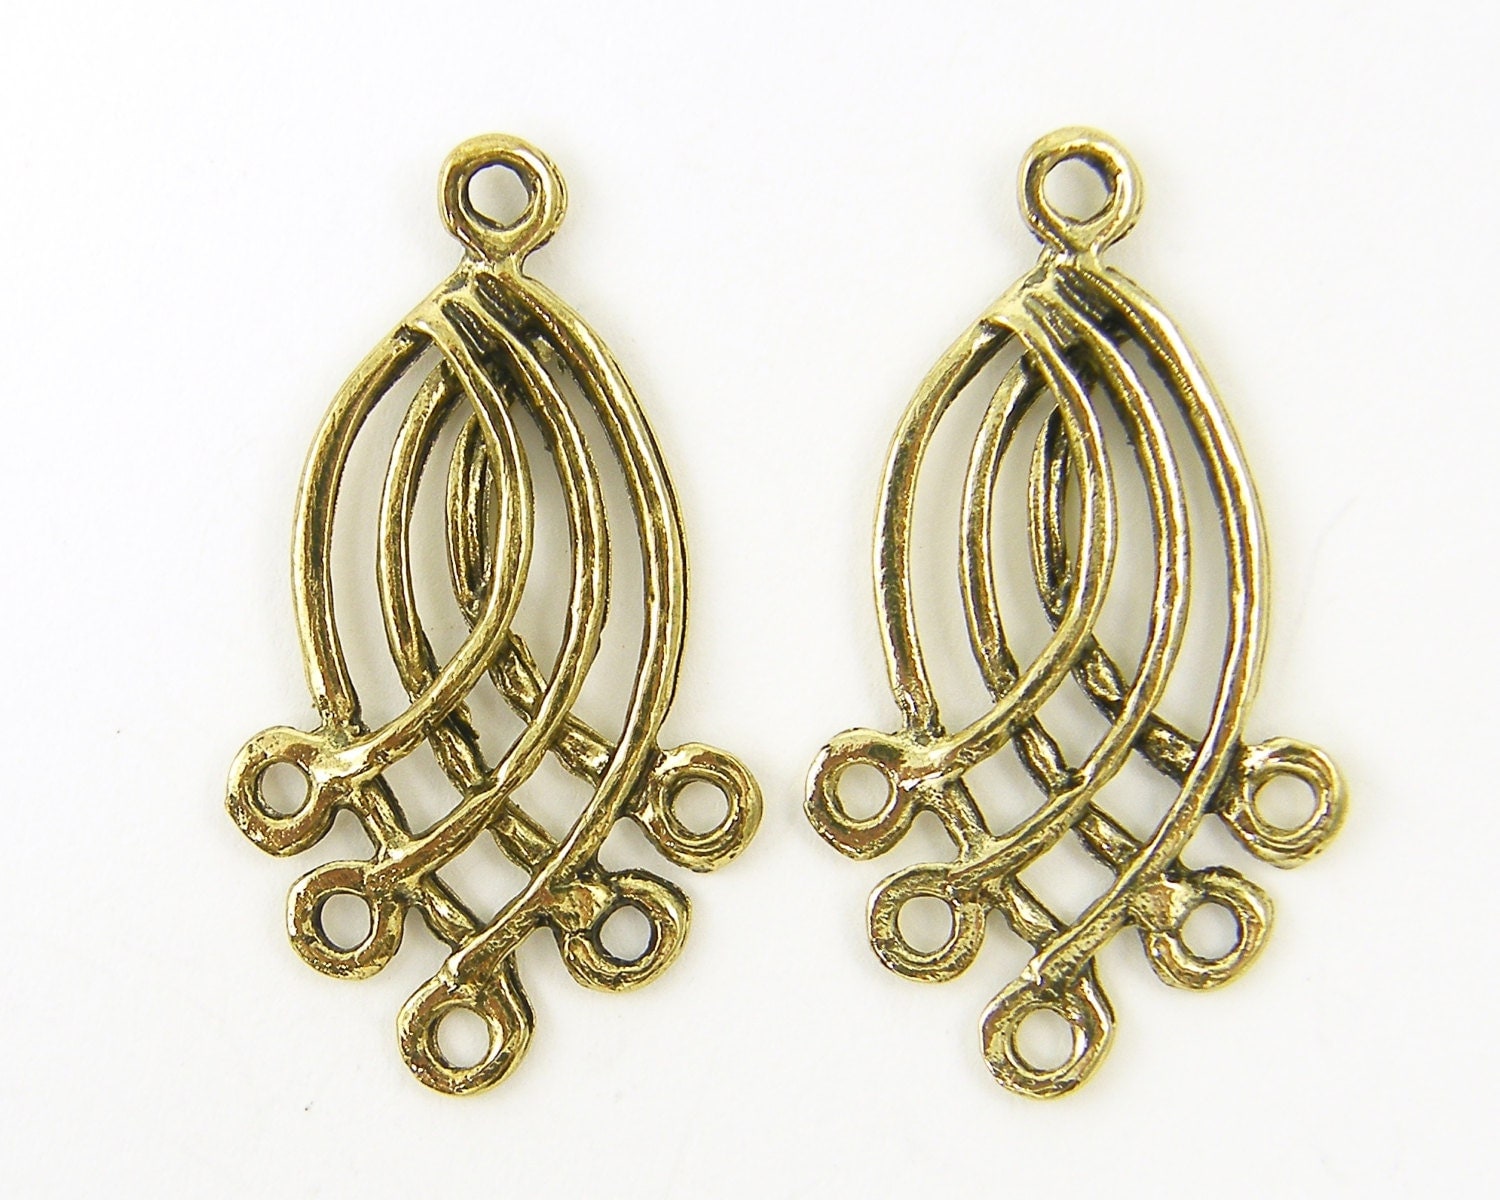 Antique Gold Chandelier Earring Findings Curved An